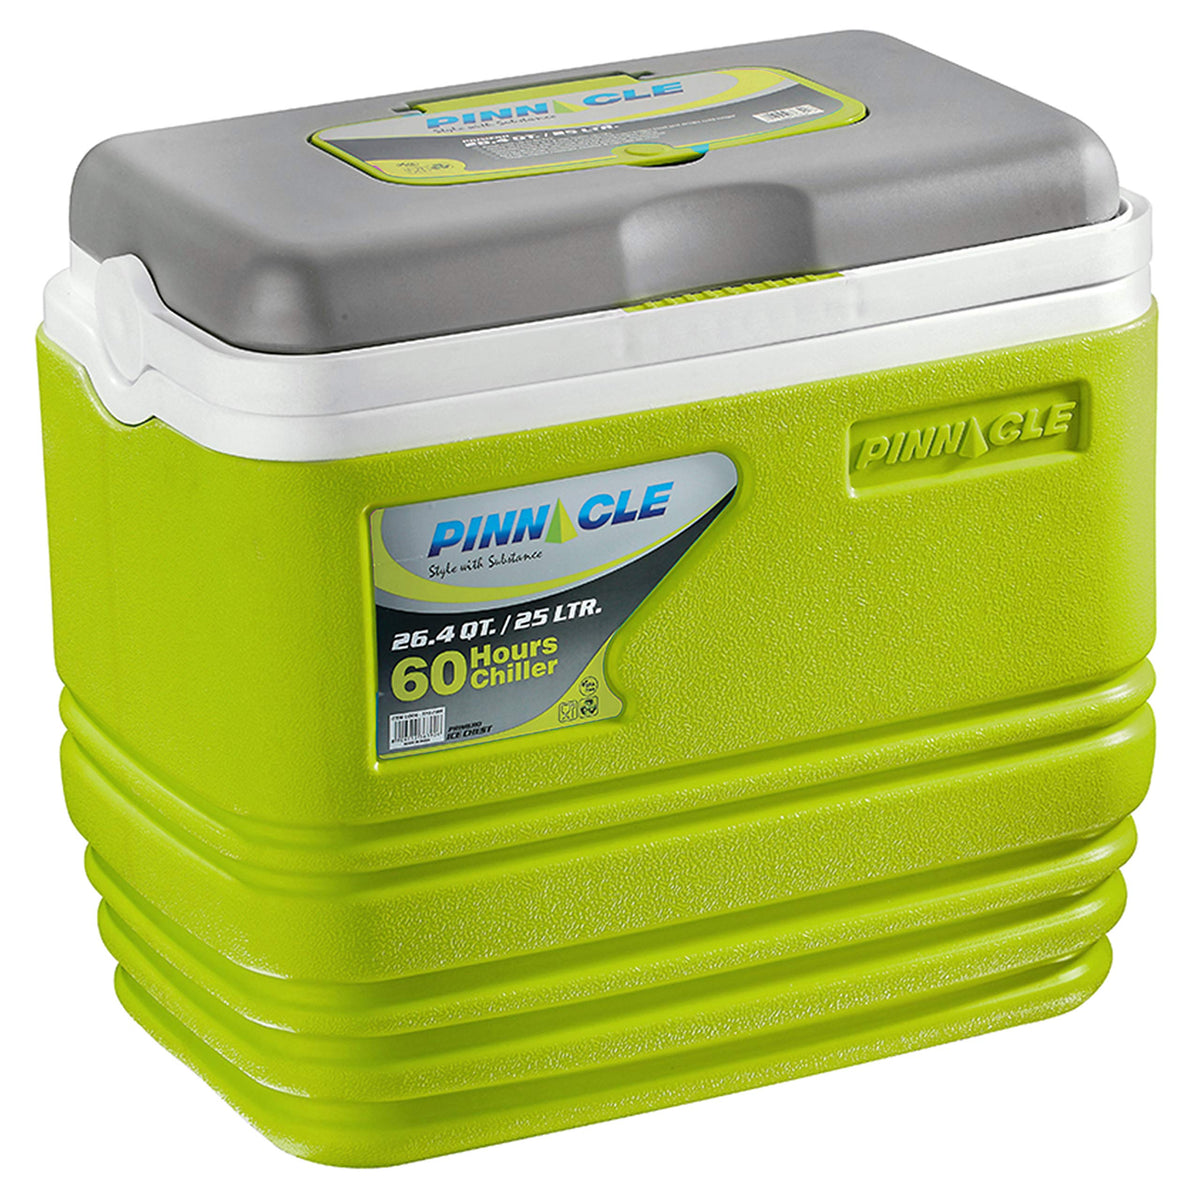 Pinnacle Primero Ice Cooler Box | Travel Party Bar for Ice Cubes | Cold Drinks | Medical Purpose | Keeps Cold Upto 72 Hours (25 Litre) (Green)